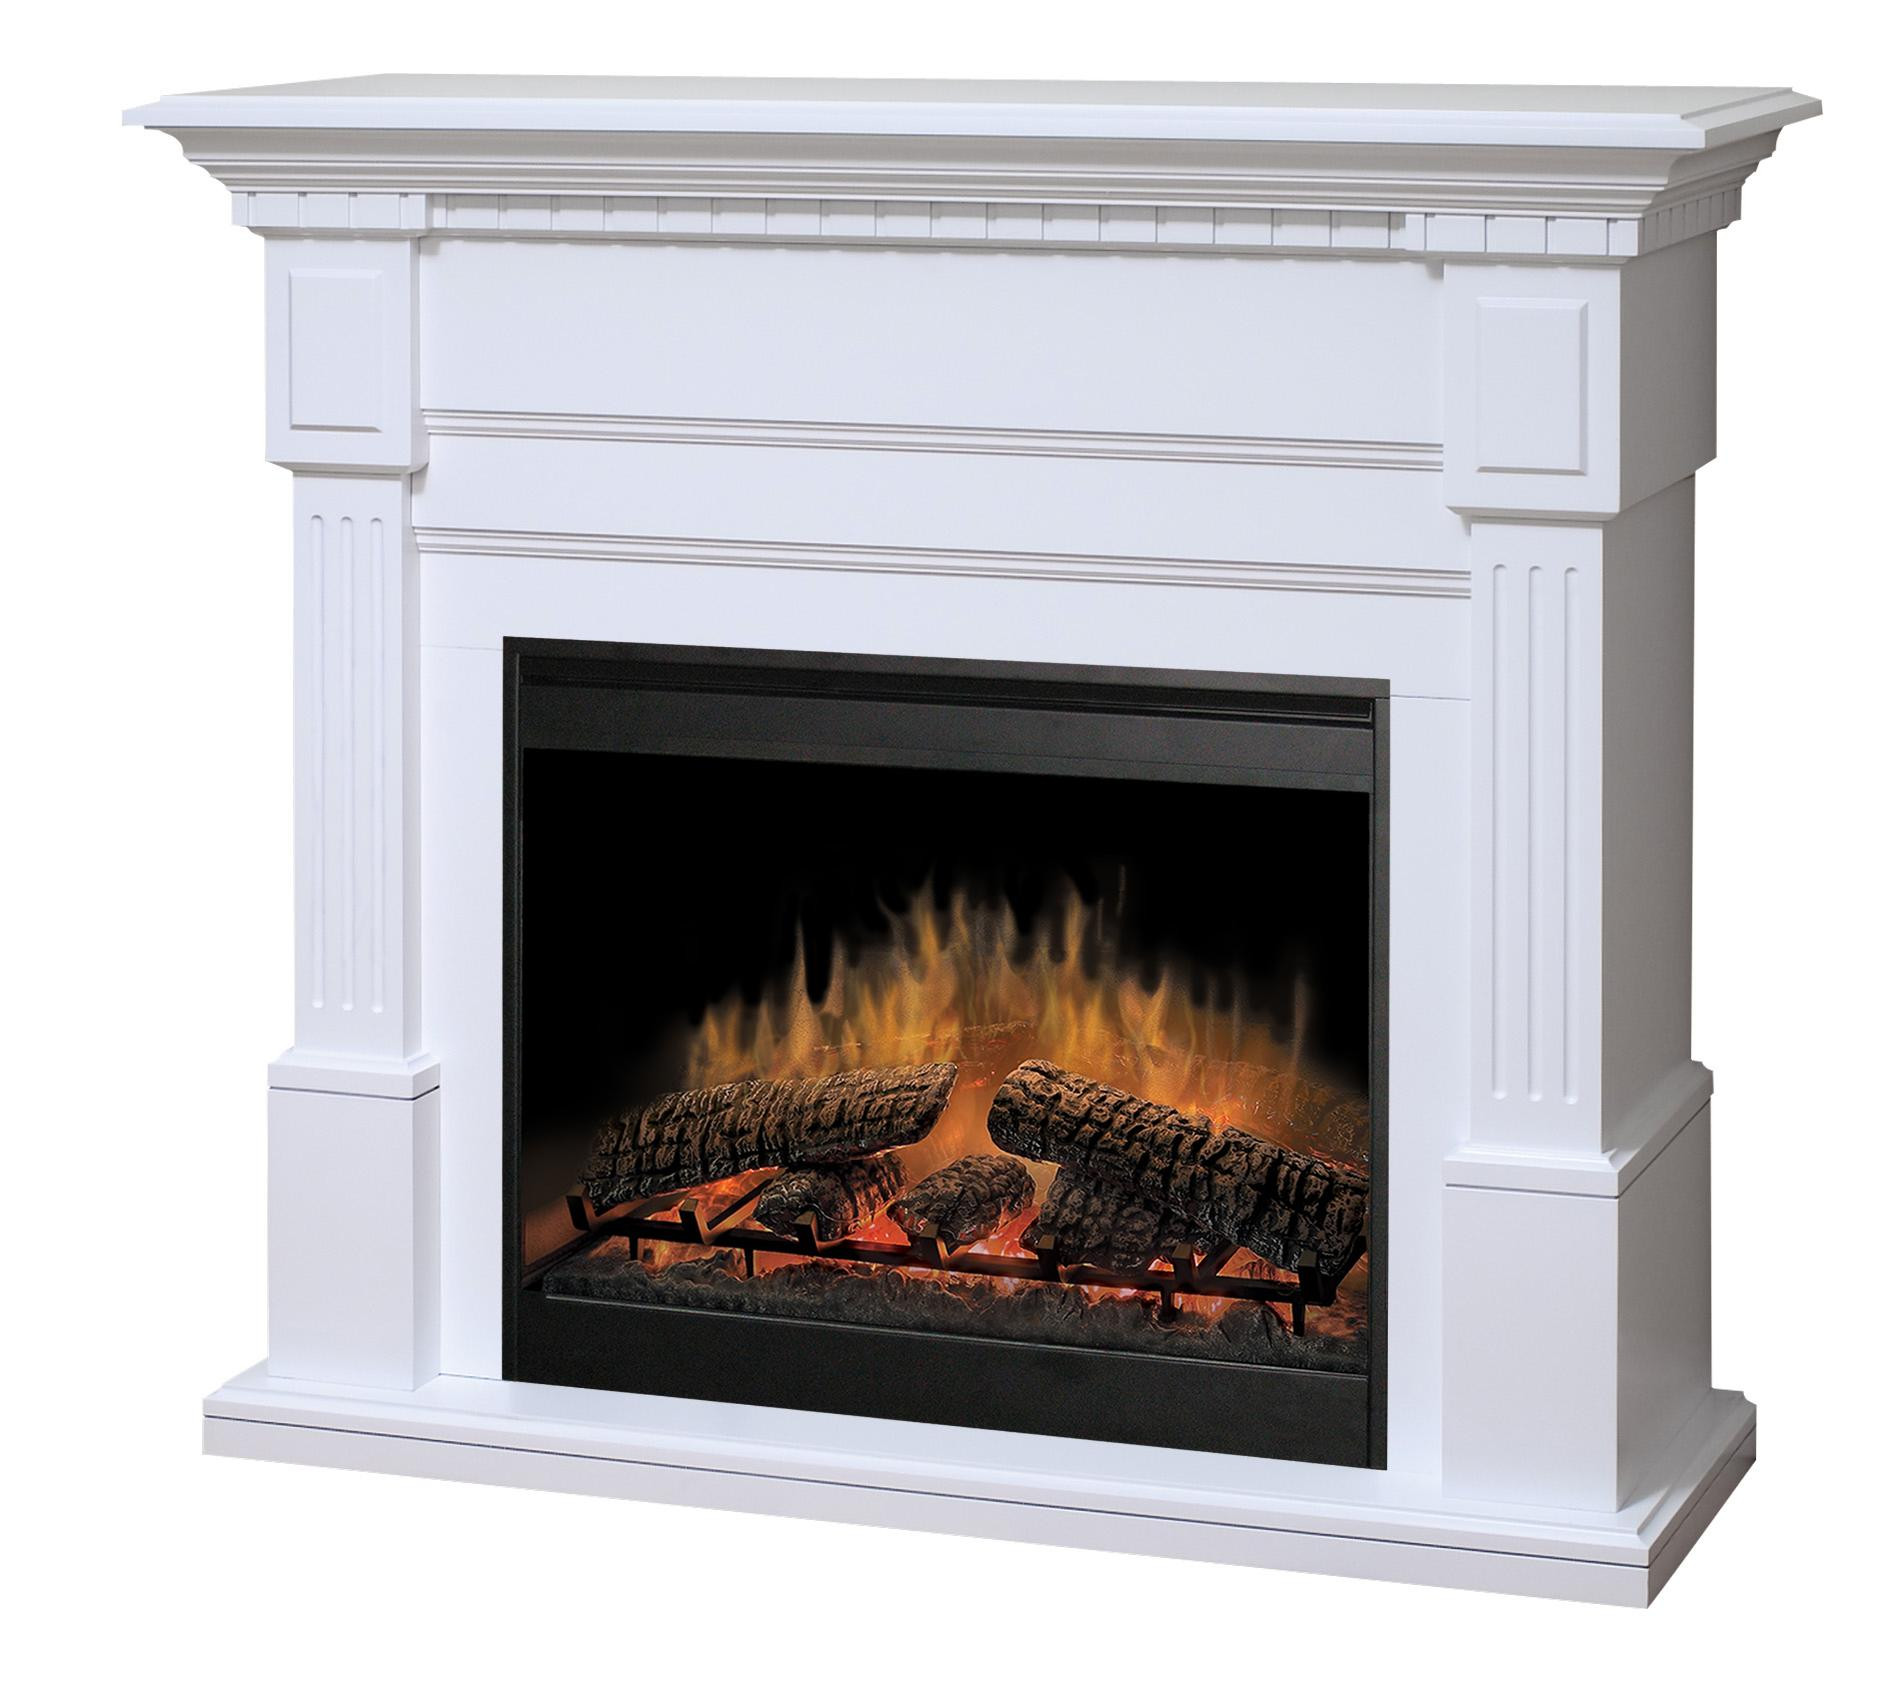 Dimplex White Electric Fireplace
 Es White Electric Fireplace by Dimplex